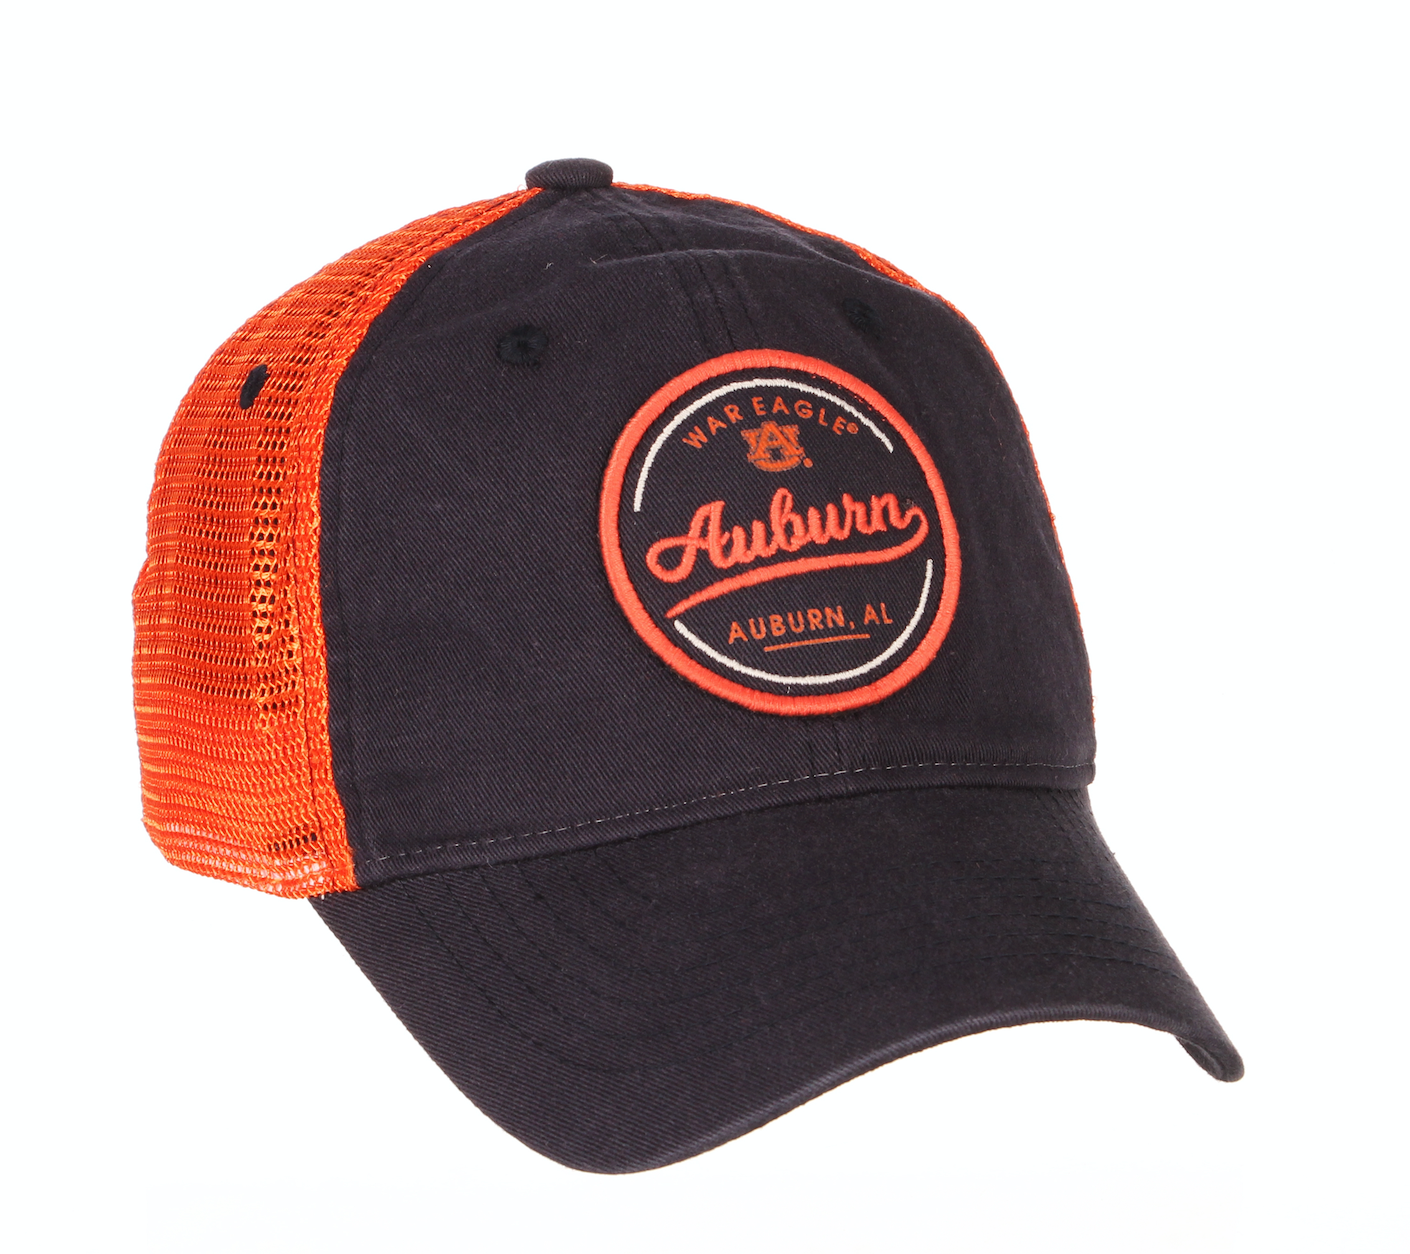 War Eagle Home Patch Hat - 365 Gameday